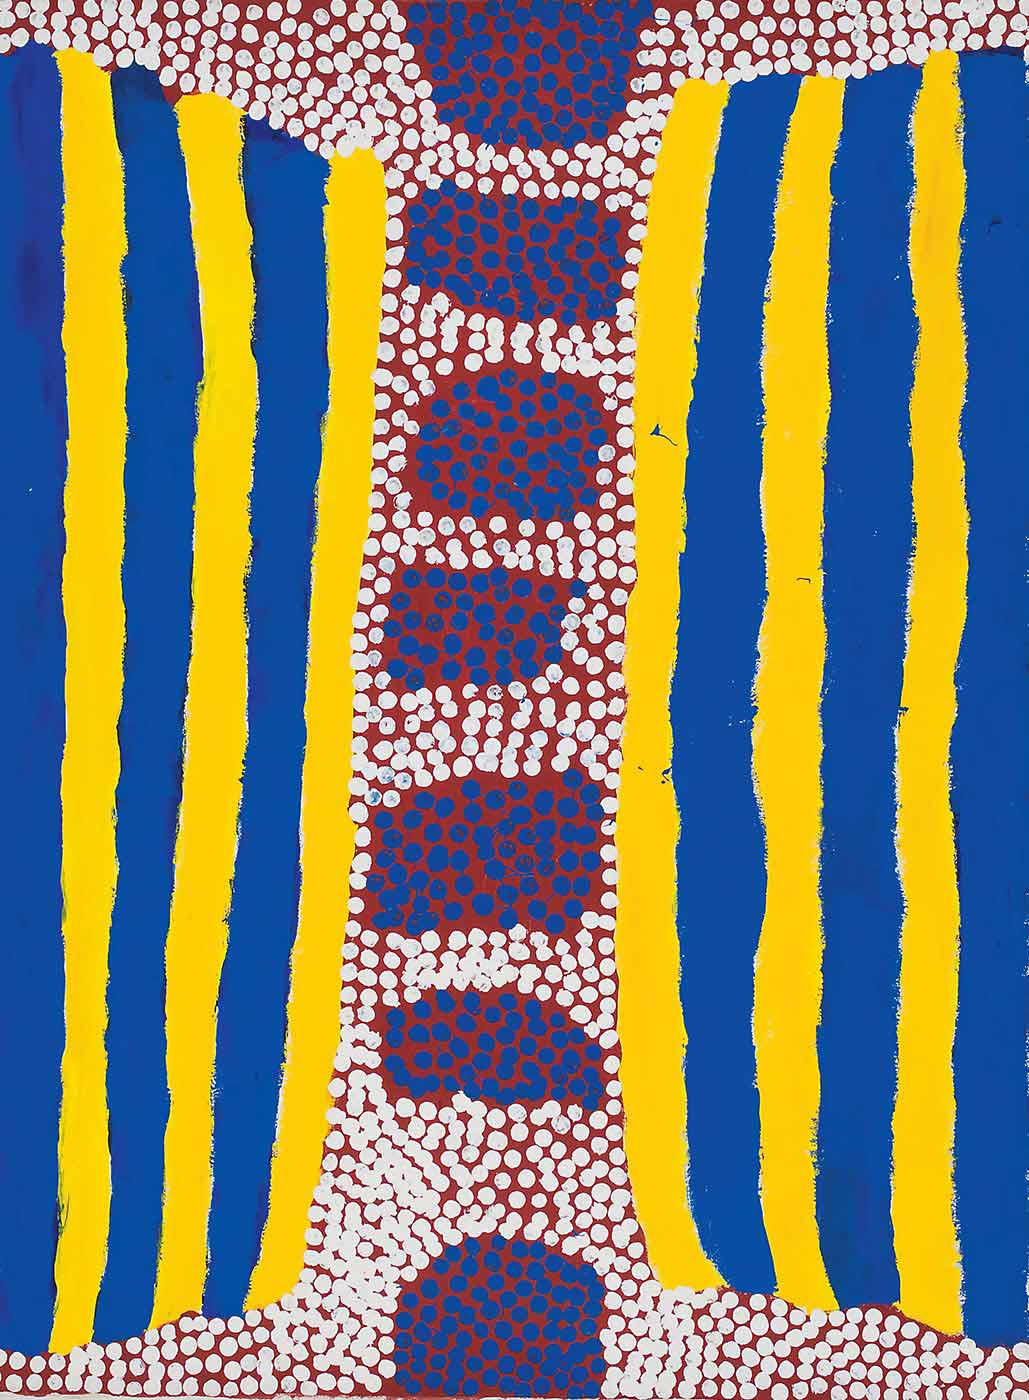 A painting on canvas with a vertical line of blue dotted rectangles on brown, flanked by vertical yellow and blue stripes. The background is brown covered with white dots.